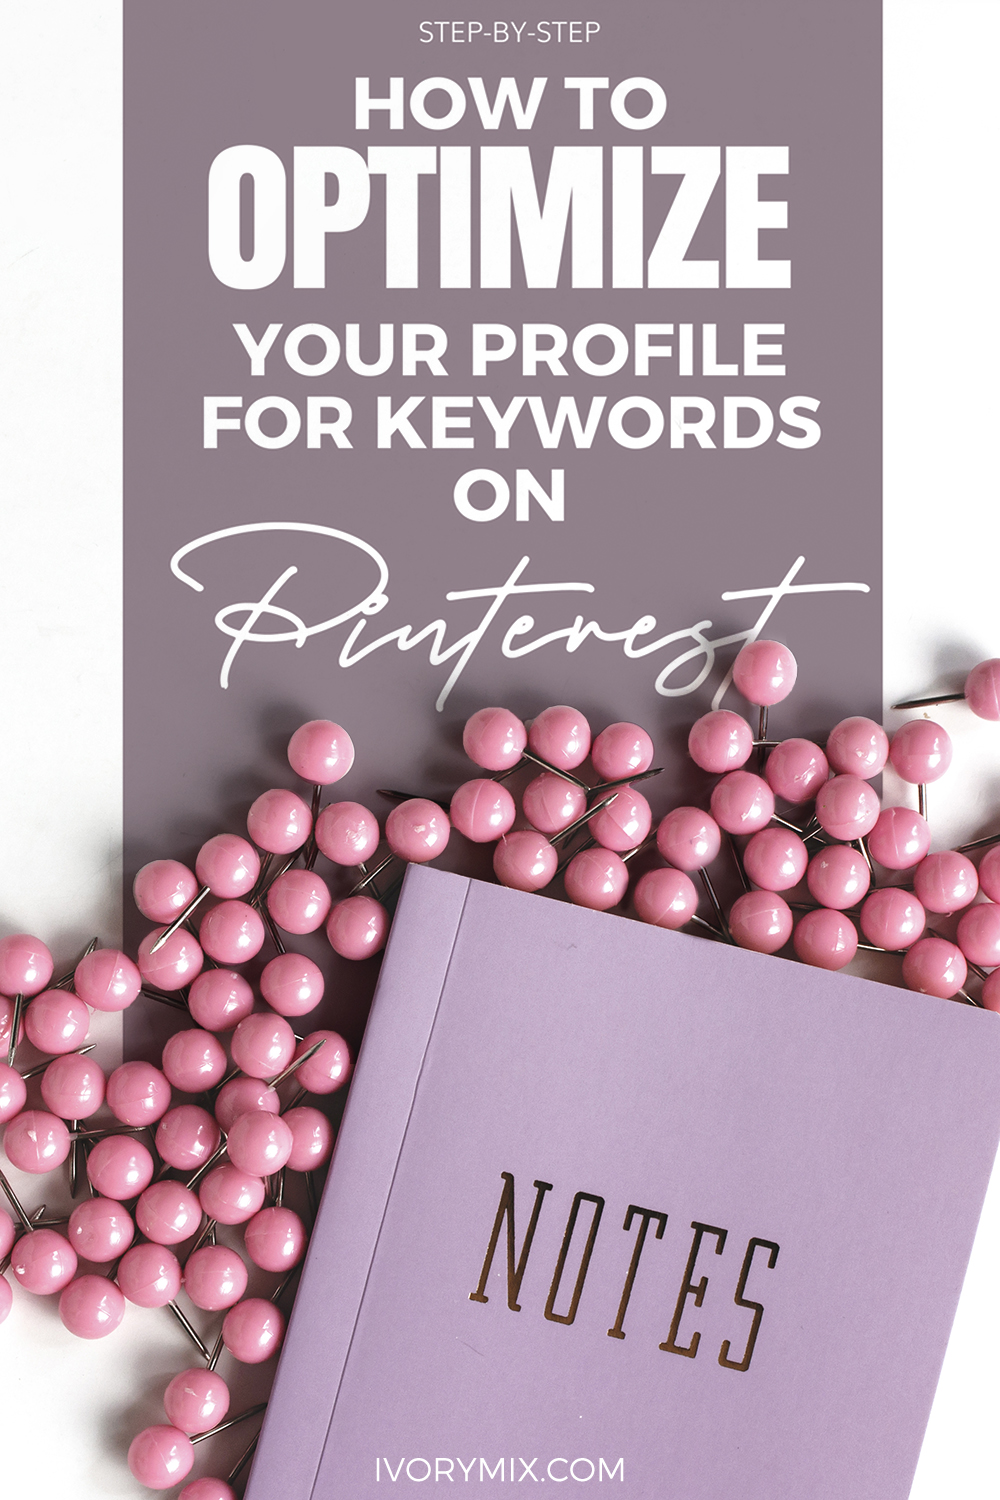 Keyword optimize your Pinterest profile and blog Step by step for better search ranking and marketing using SEO